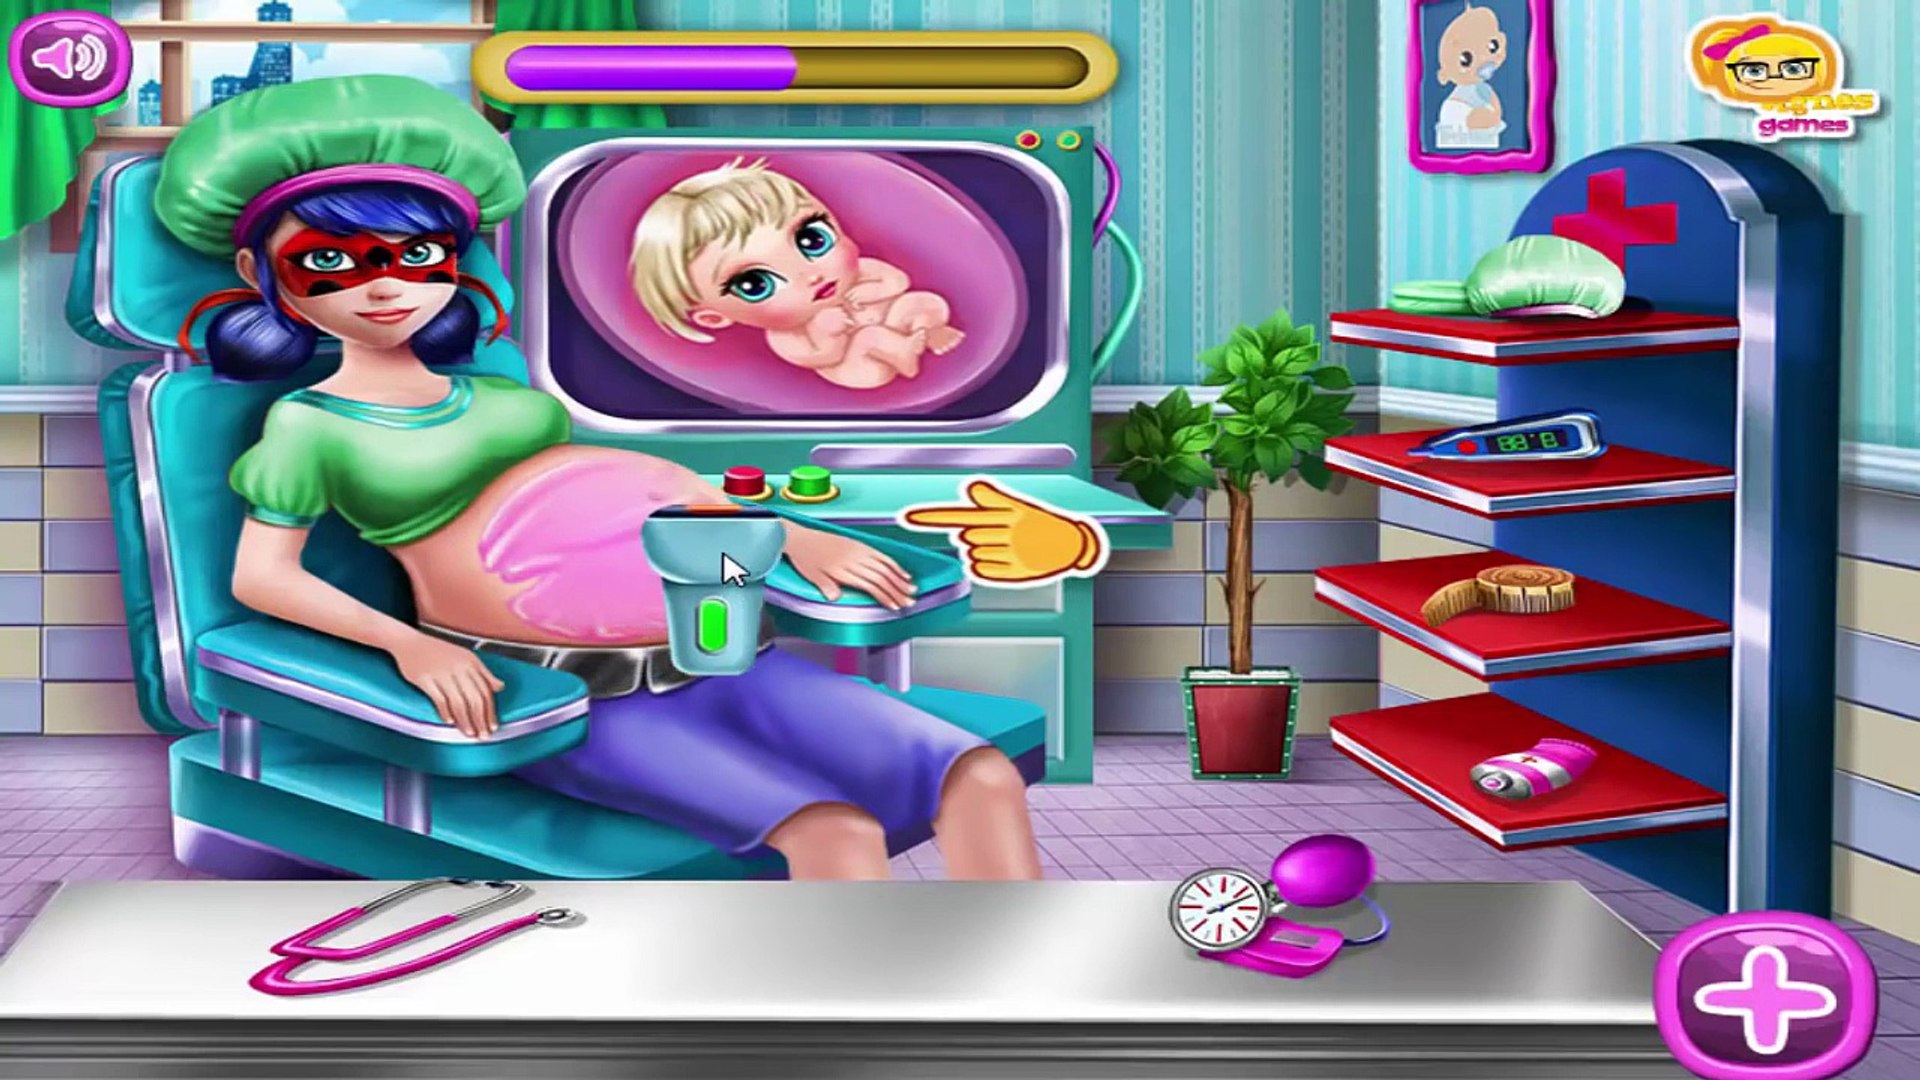 Miraculous Ladybug Pregnant Check Up - Miraculous Ladybug Video Games For Kids